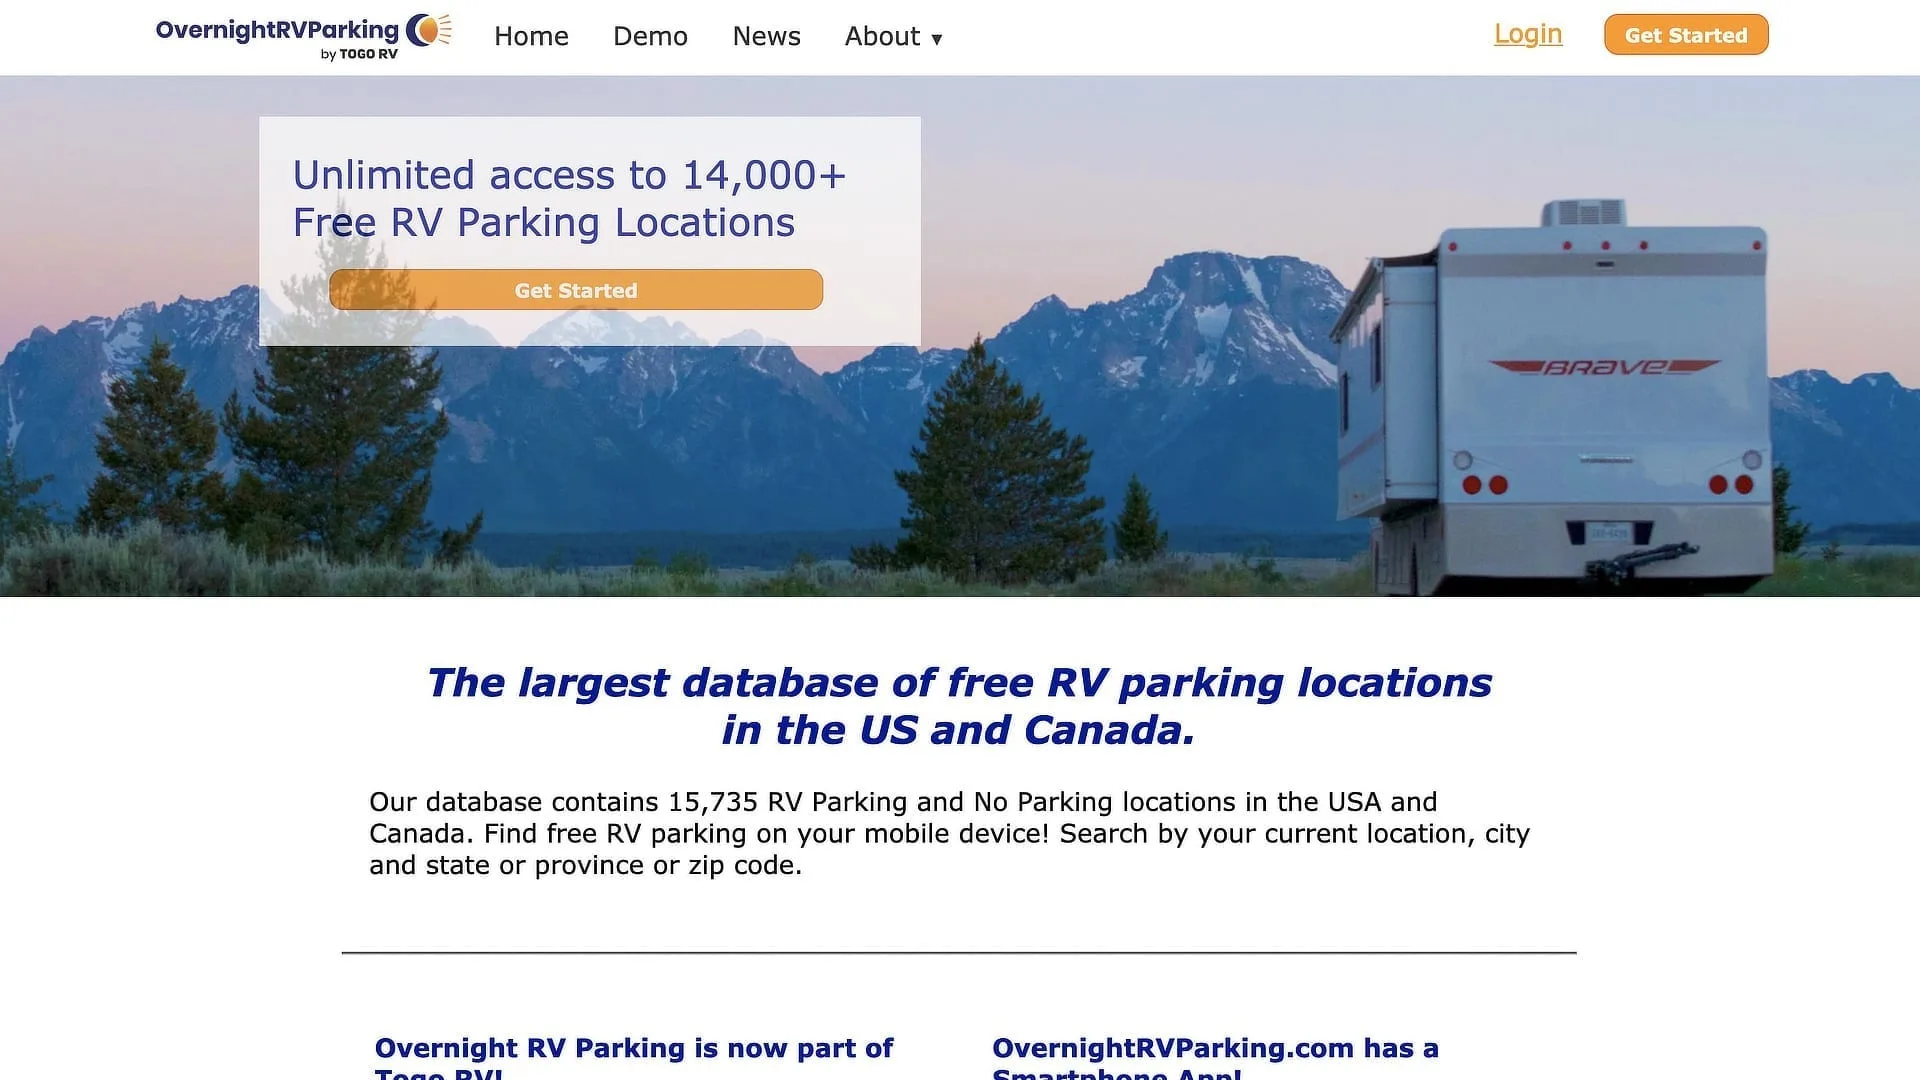 OvernightRVParking.com is a fantastic resource for finding free overnight RV parking spots.